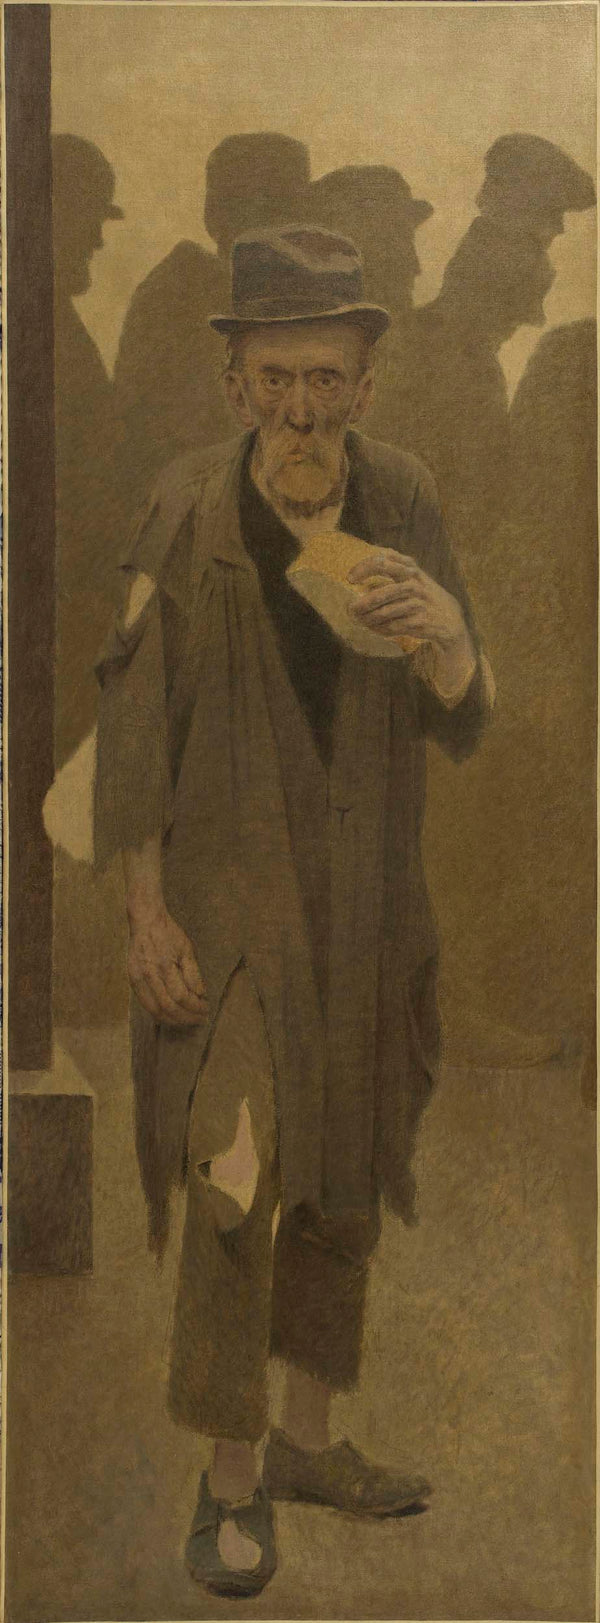 fernand-pelez-1904-the-bite-of-bread-old-man-in-rags-face-holding-a-piece-of-bread-art-print-fine-art-reproduction-wall-art